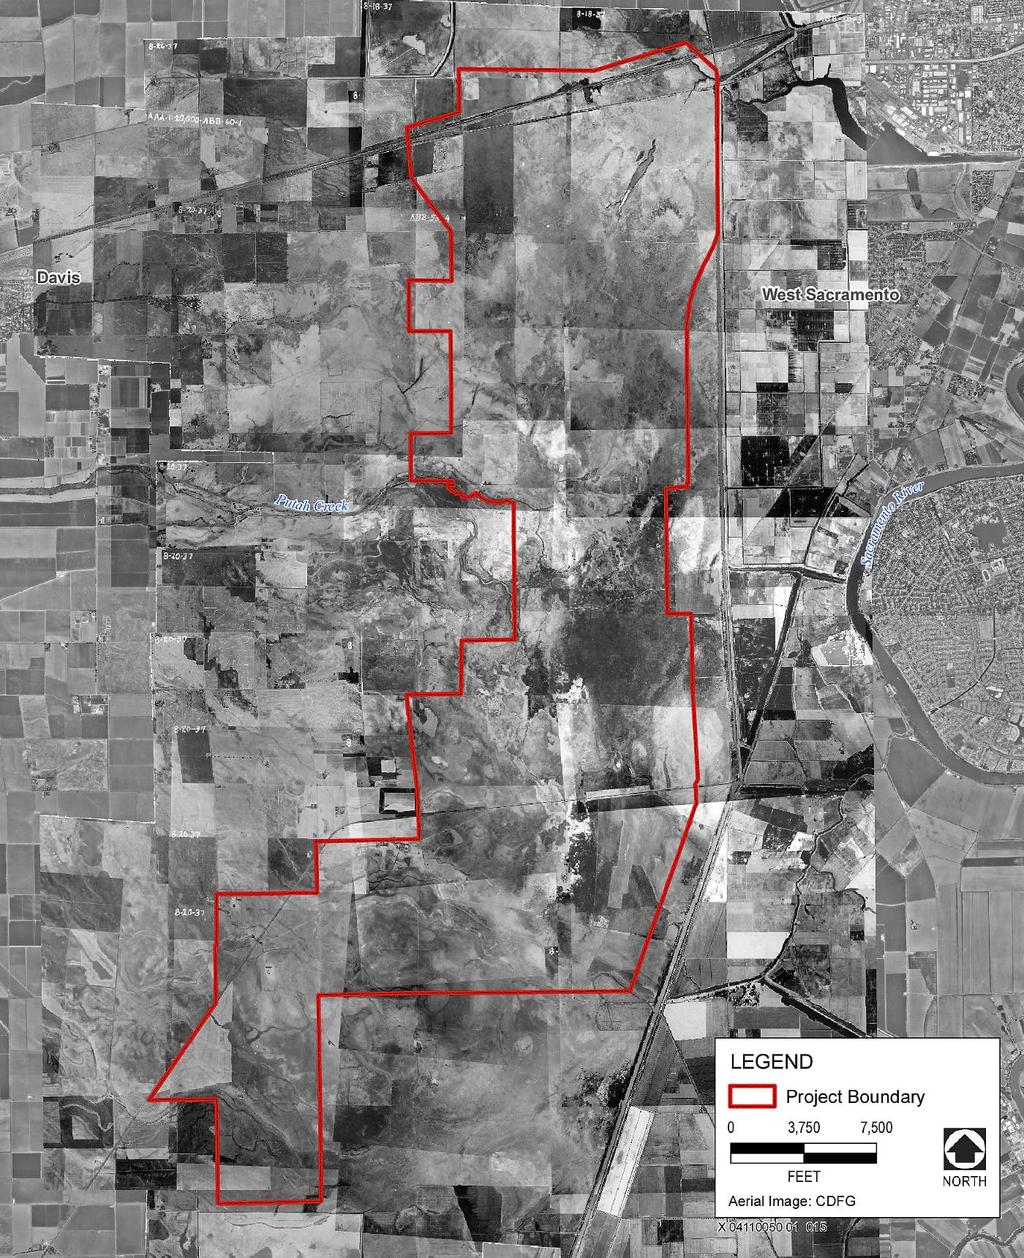 Source: Department of Fish and Game Yolo Bypass Wildlife Area Aerial Photo (1937) Exhibit